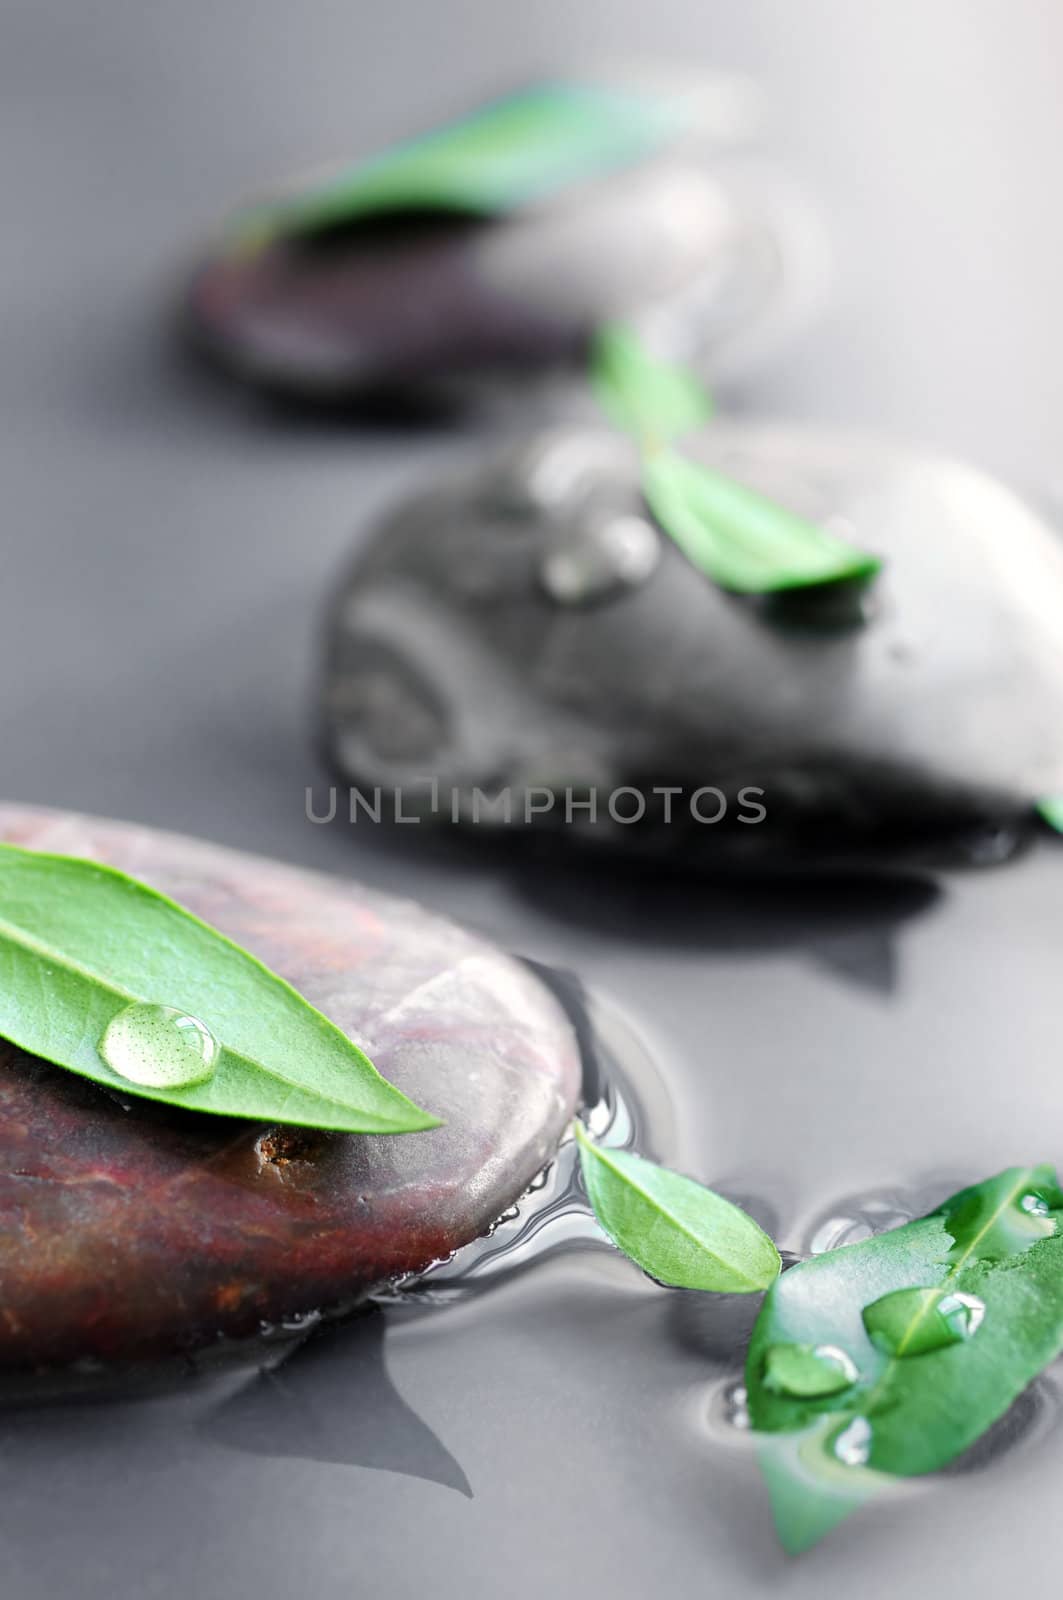 Stones submerged in water with green leaves and water drops